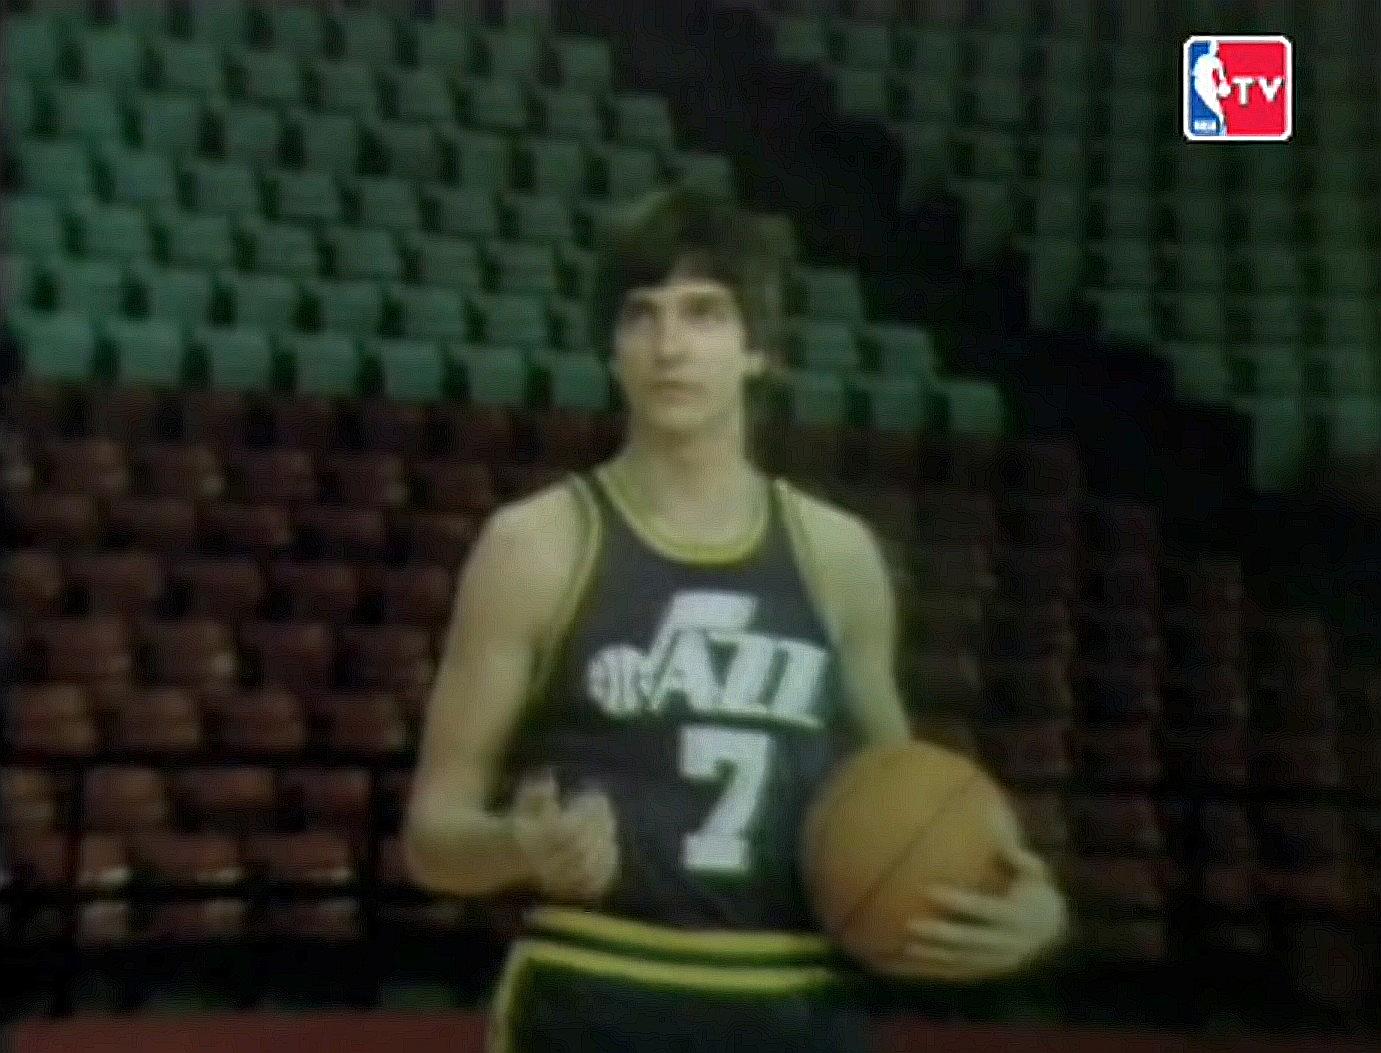 Pete Maravich - The Pistol (highlights mix) 